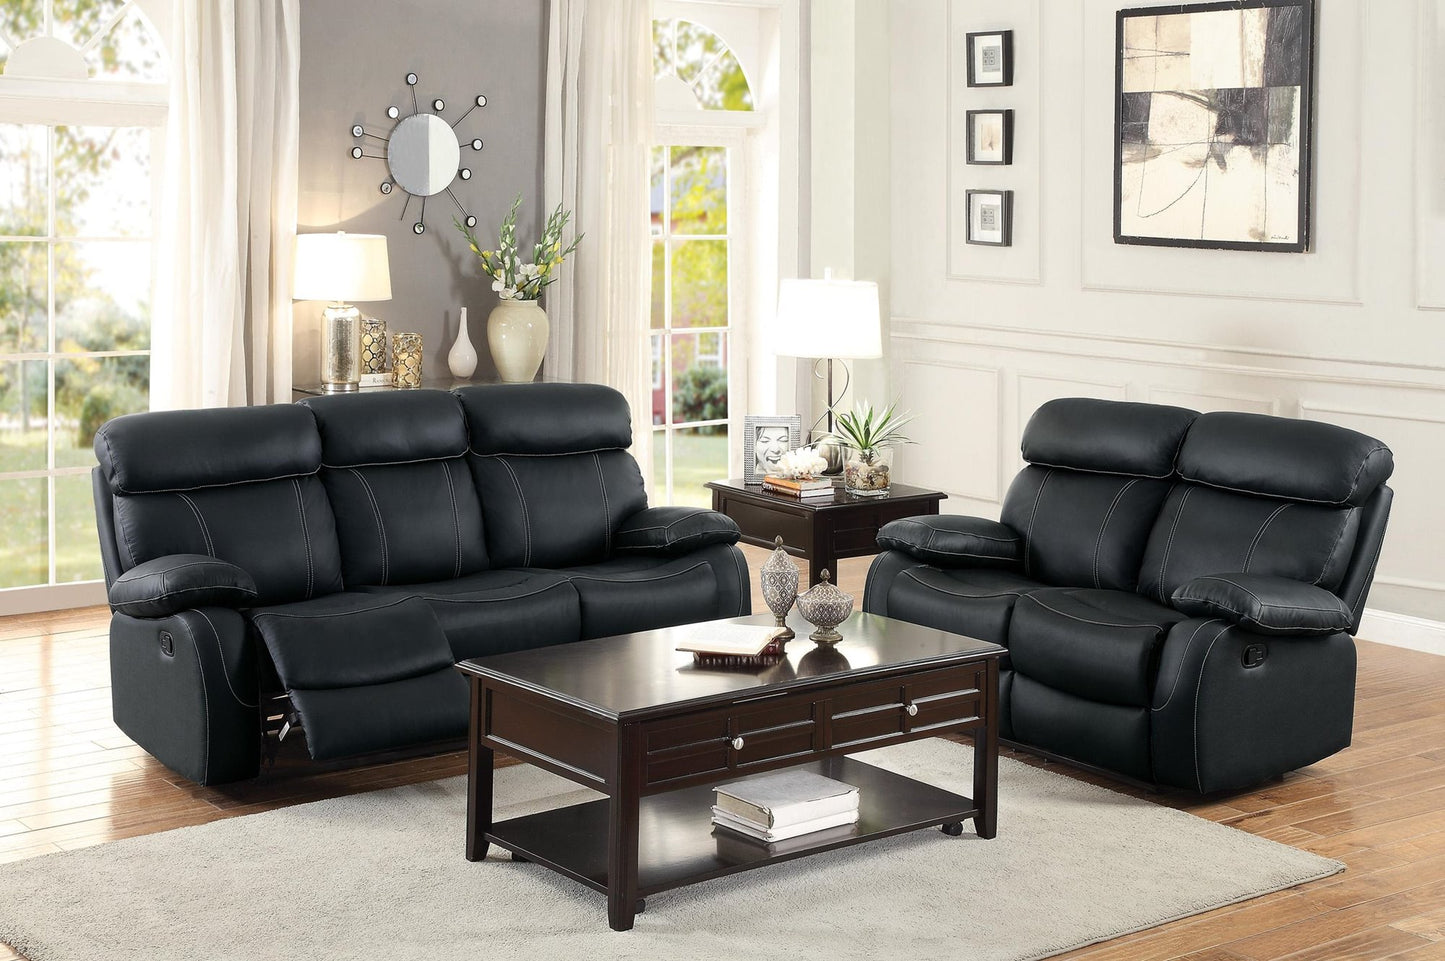 Homelegance Pendu Double Reclining Love Seat in Black Leather